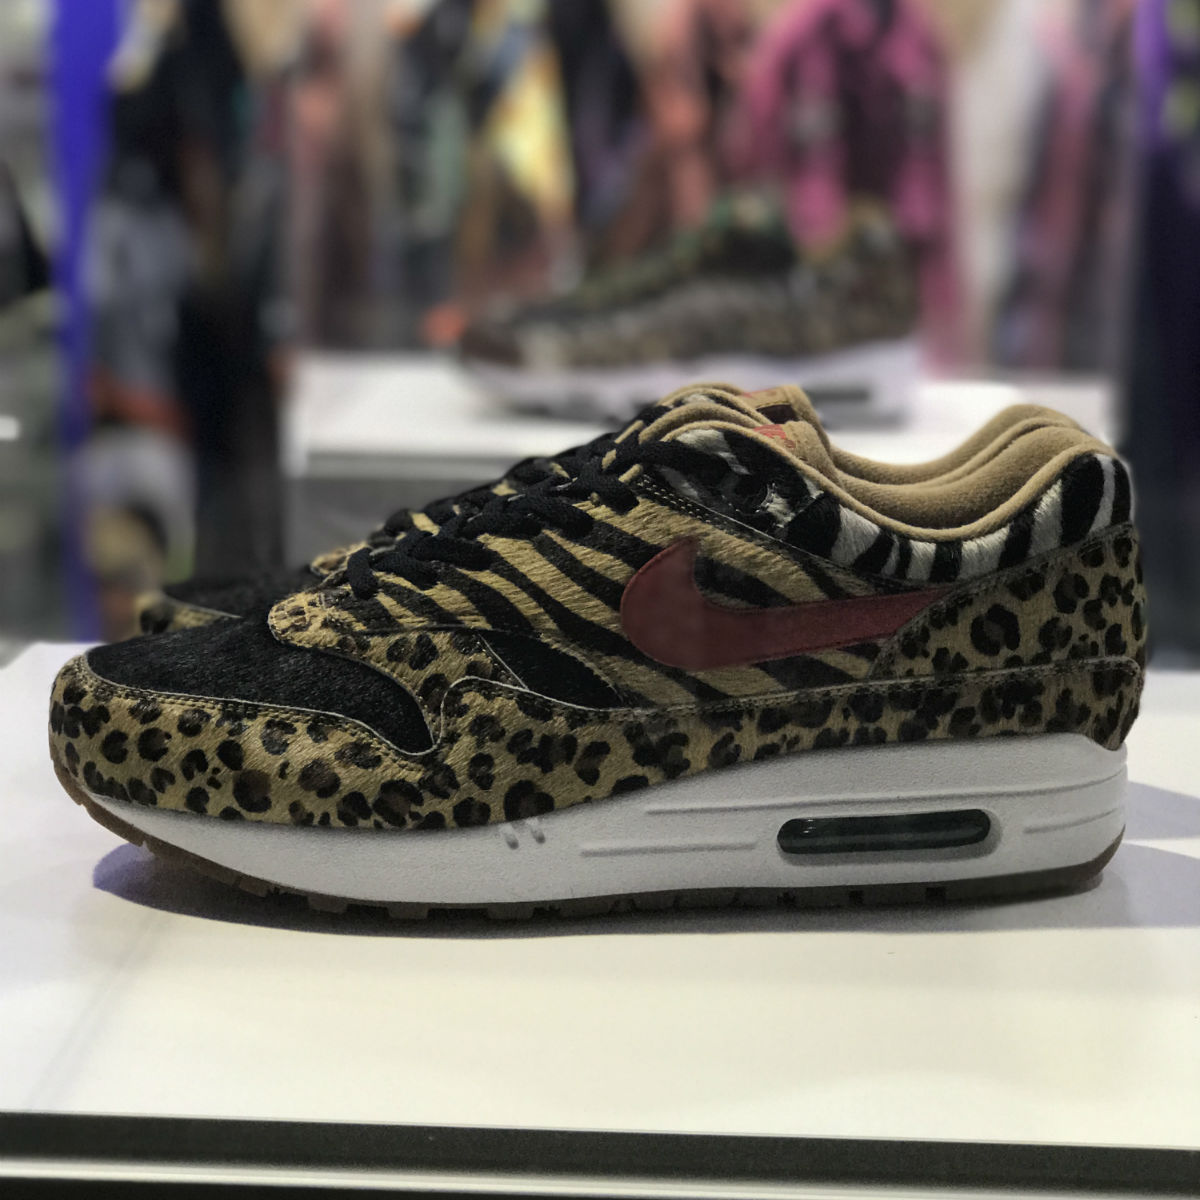 Atmos and Nike Have a New Air Max 'Animal Pack' in the Works for